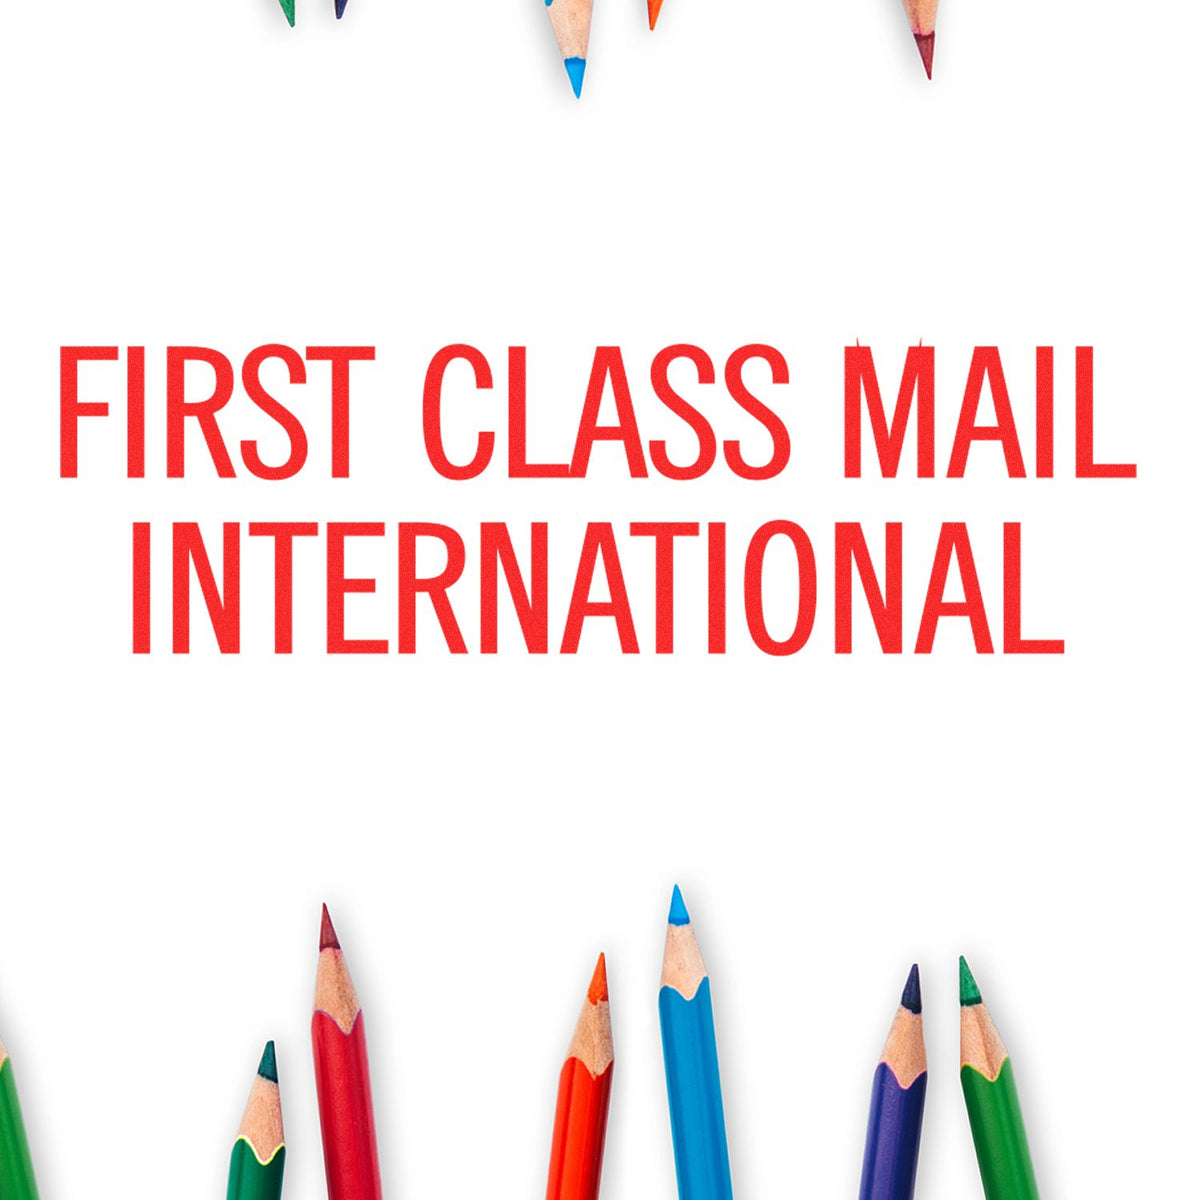 Large Pre-Inked First Class Mail International Stamp In Use Photo